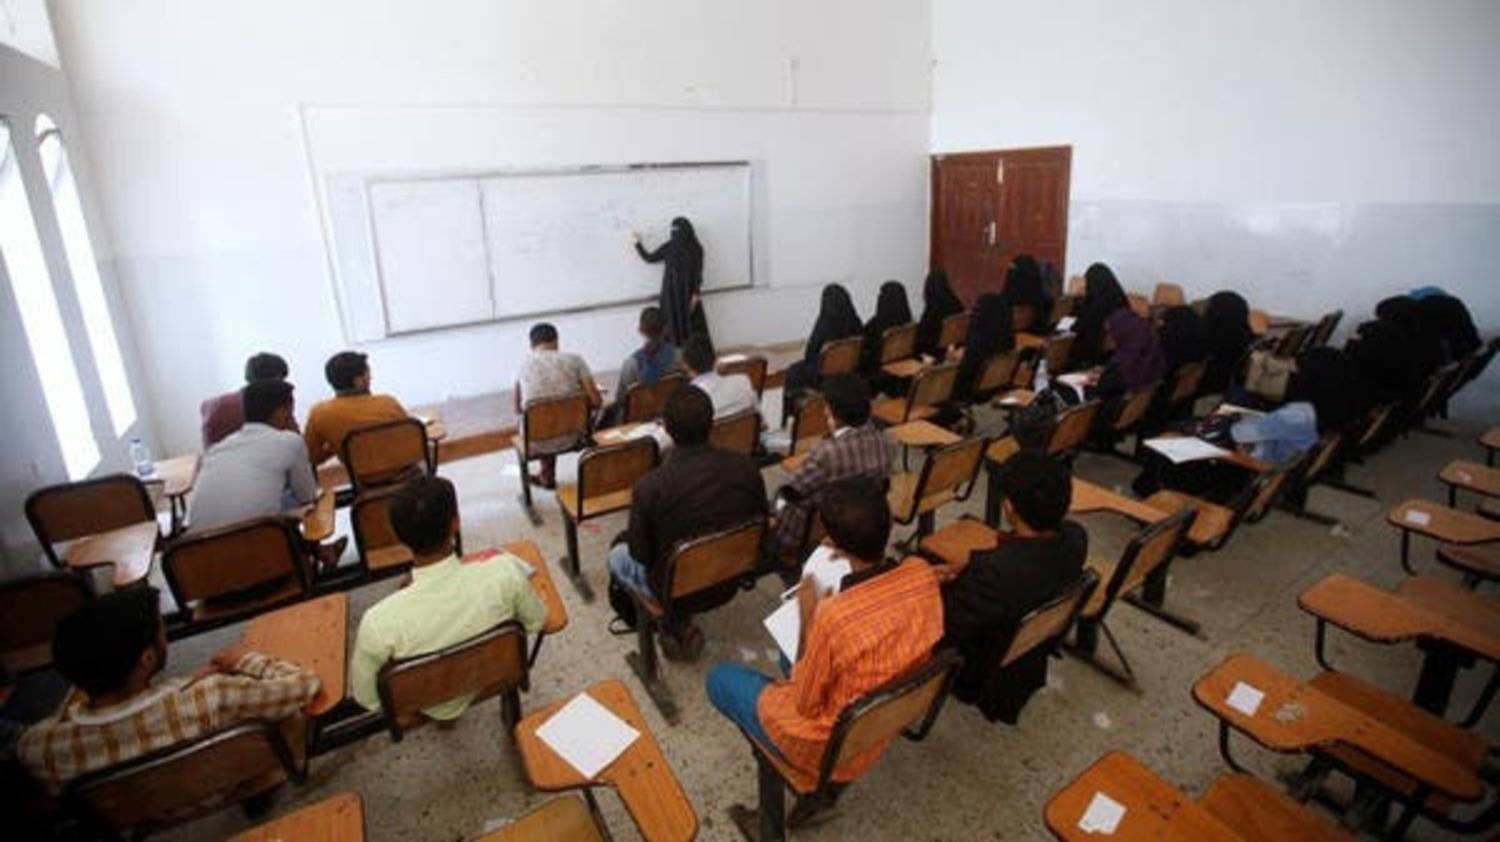 Students listen to a professor during a class at Sanaa University in Sanaa, Yemen August 12, 2017. Reuters file photo
